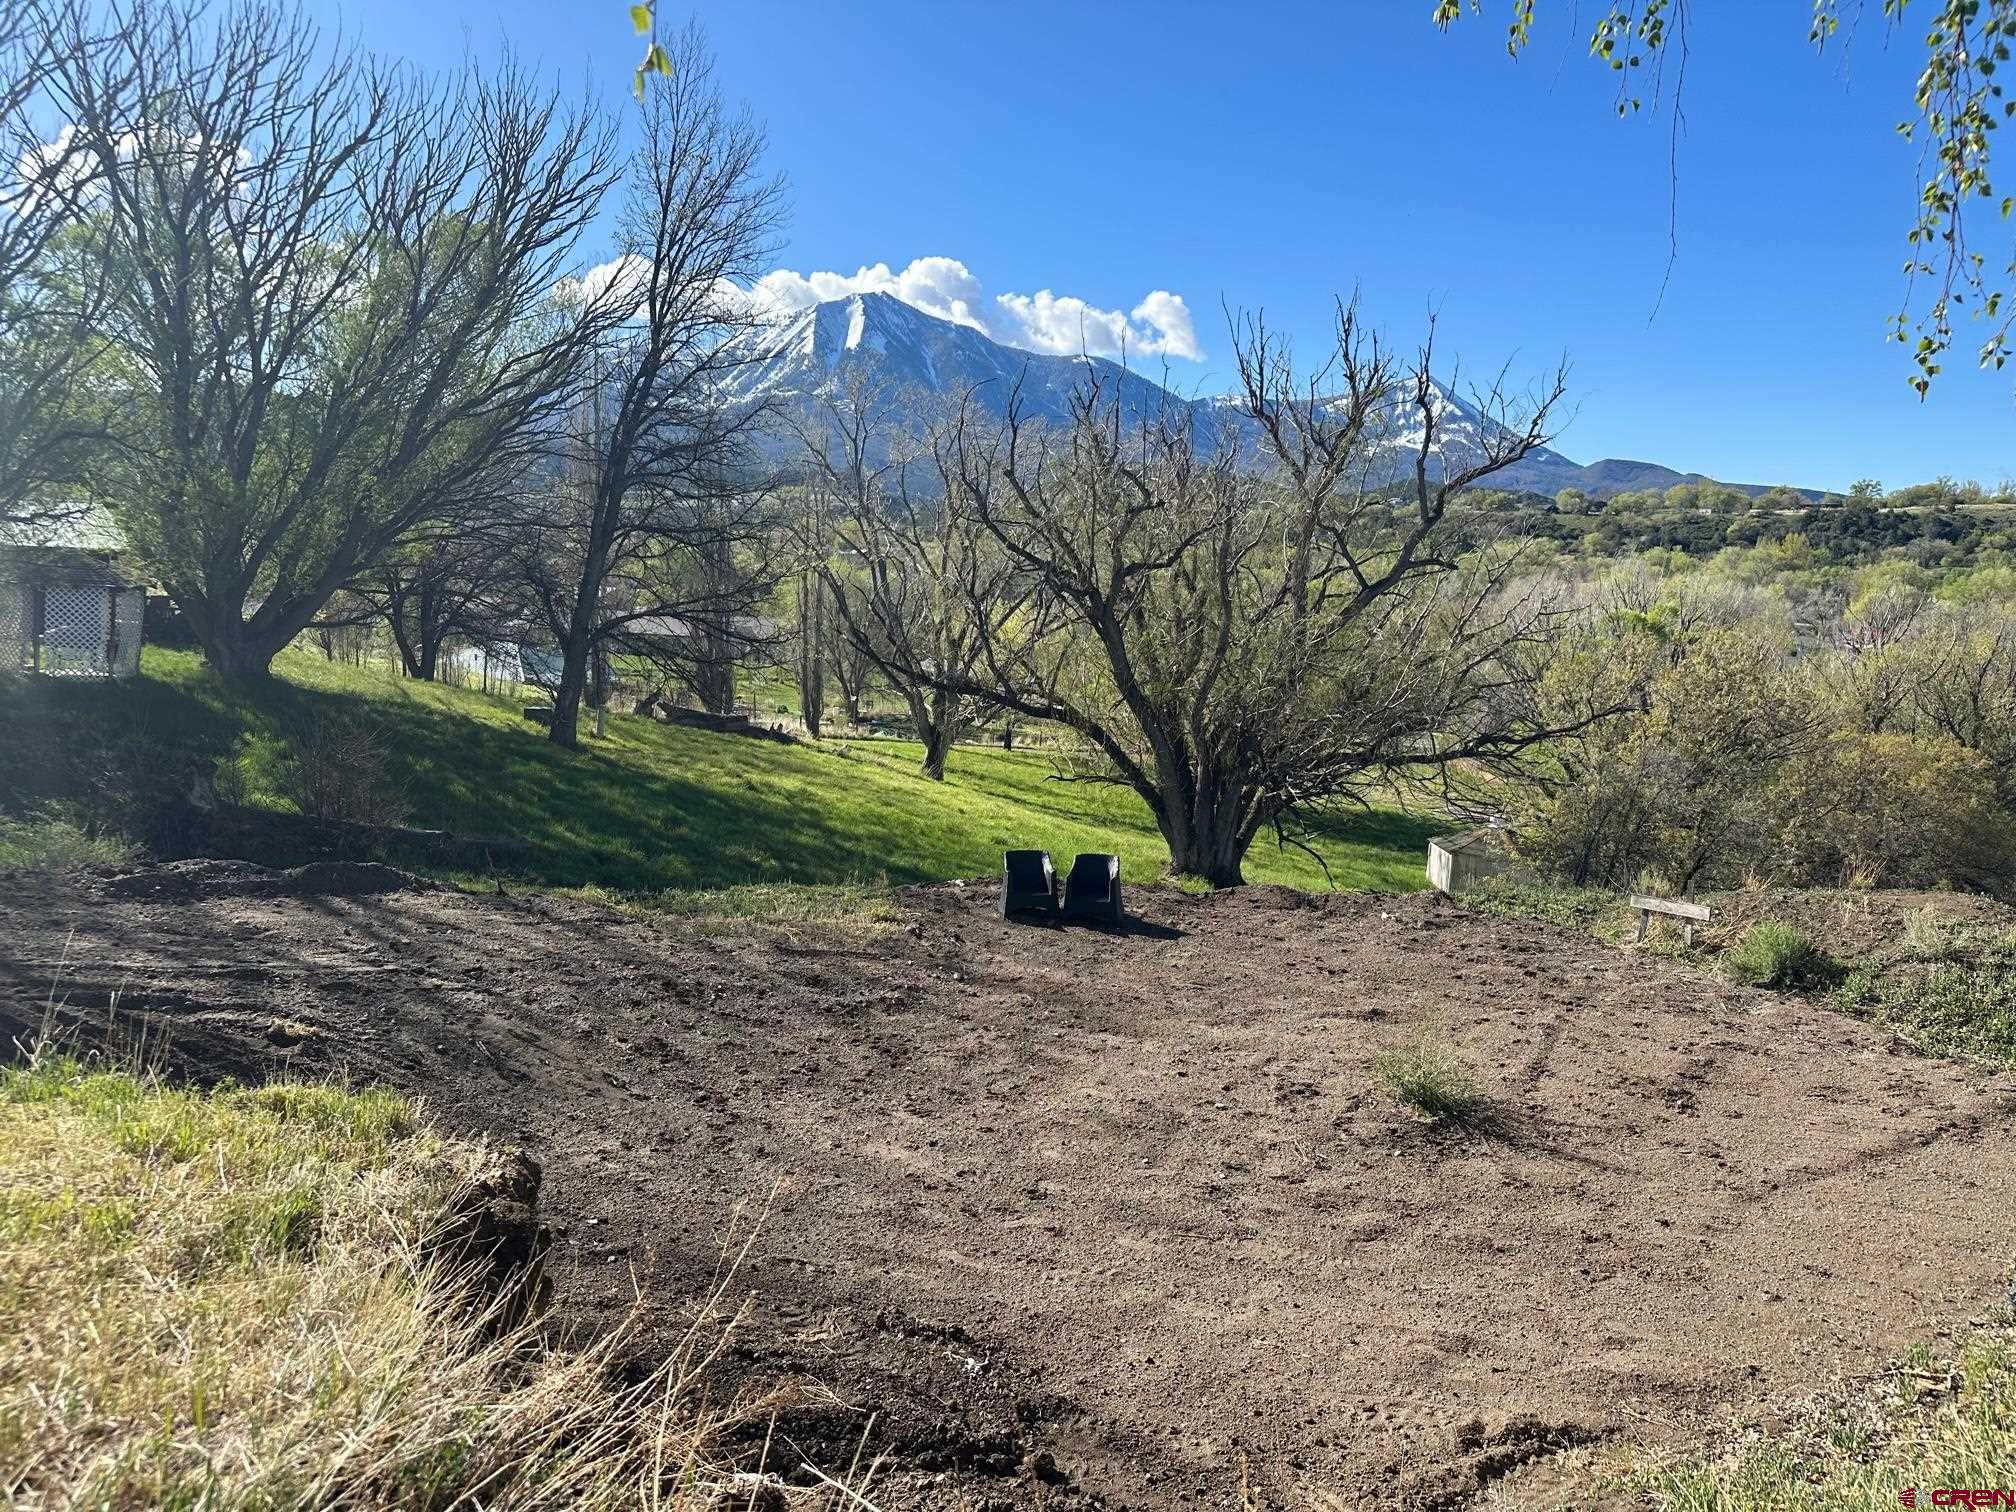 Paonia Town Lot with Mountain Views! Don't miss this opportunity to create your dream home in a picturesque setting with convenient access to amenities and breathtaking views. This lot comes with a Town of Paonia Water Tap, Sewer Tap, Irrigation Water, and Electric. It is located in walking distance to downtown Paonia and Jumbo Trail System.  The path in front of the  property takes you to Apple Valley Park which features tennis courts, pickle ball, playground, creek, and a workout area. Build your dream home today in Paonia!